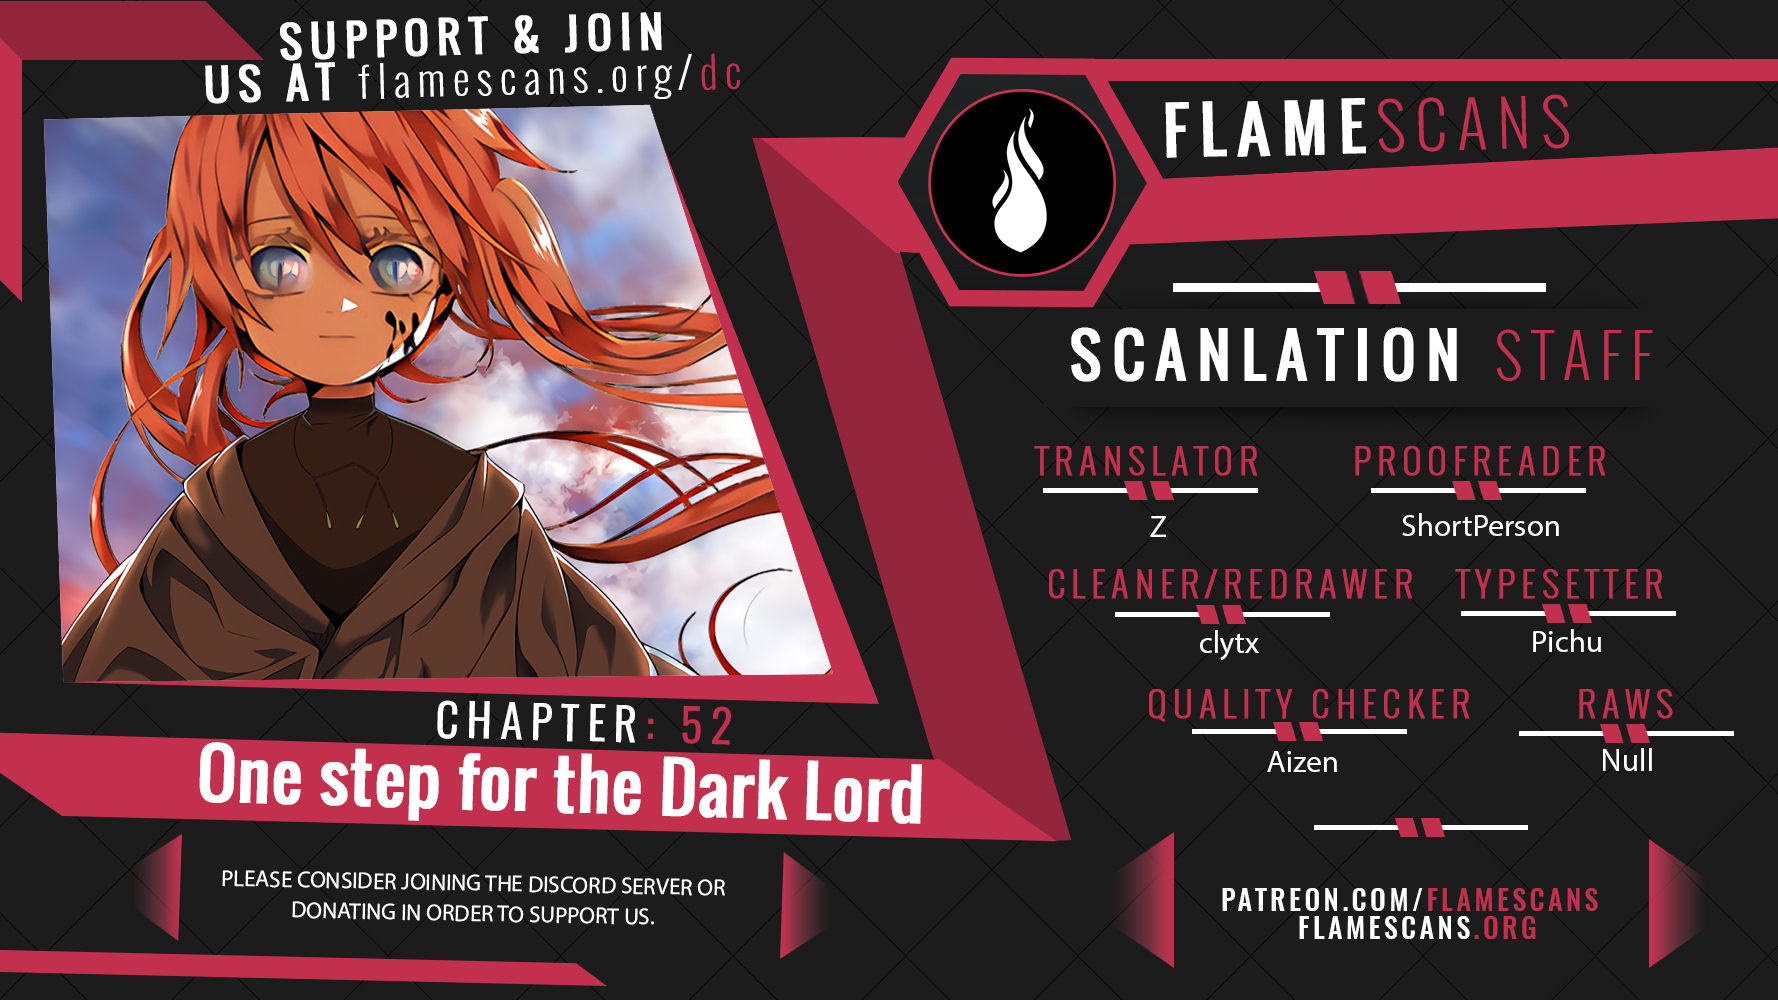 One Step for the Dark Lord - Chapter 20221 - Image 1